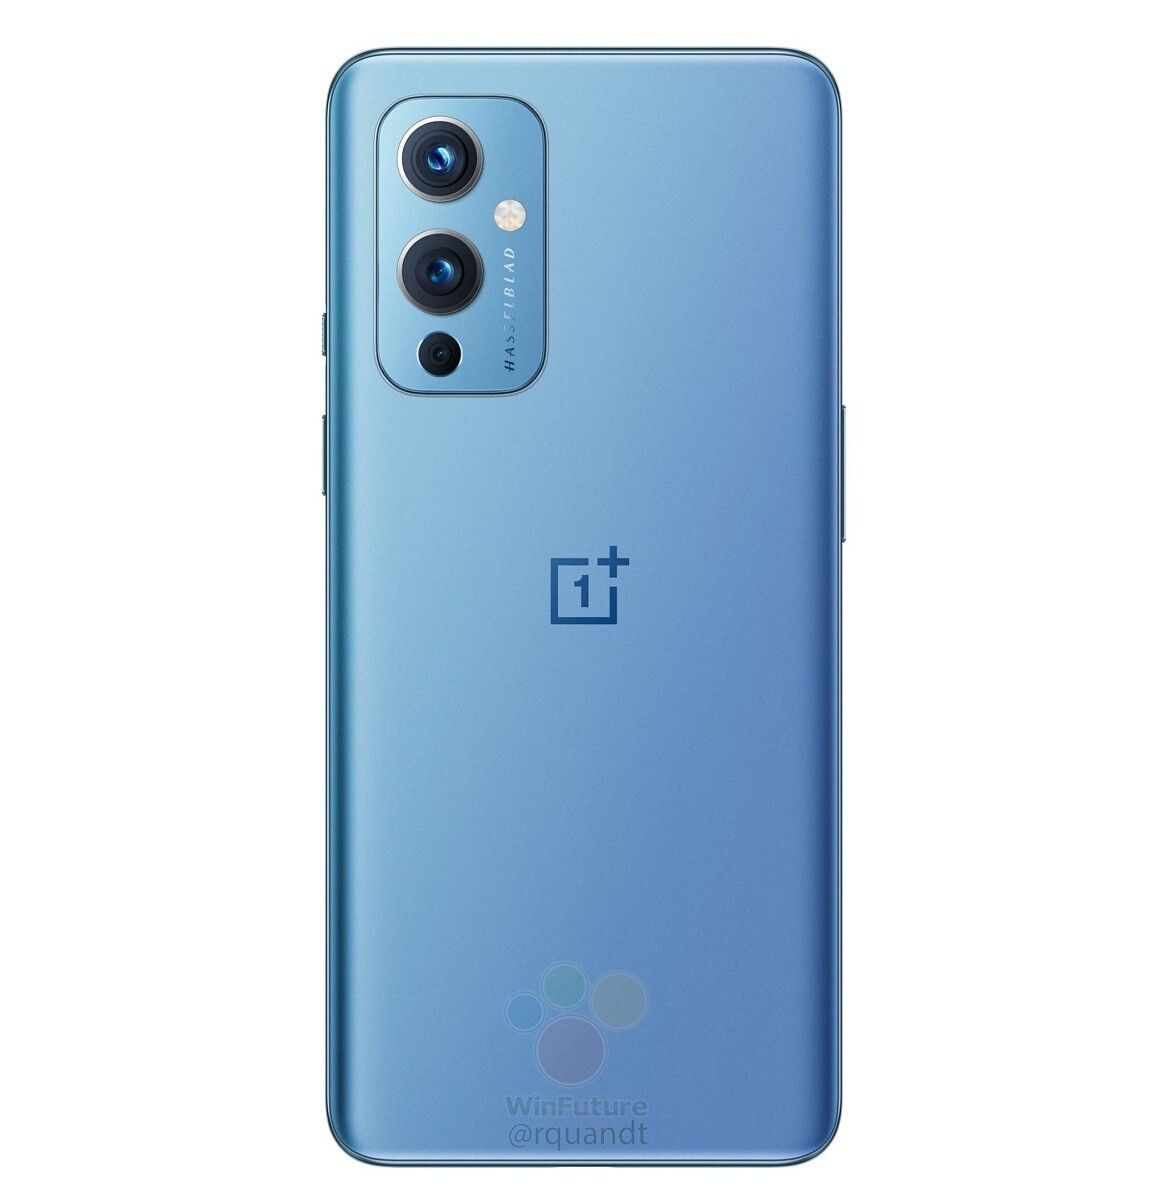 The unlocked OnePlus 9 is $699 ($30 off) when you enter code <strong>SUMMEROP9</strong> at checkout.